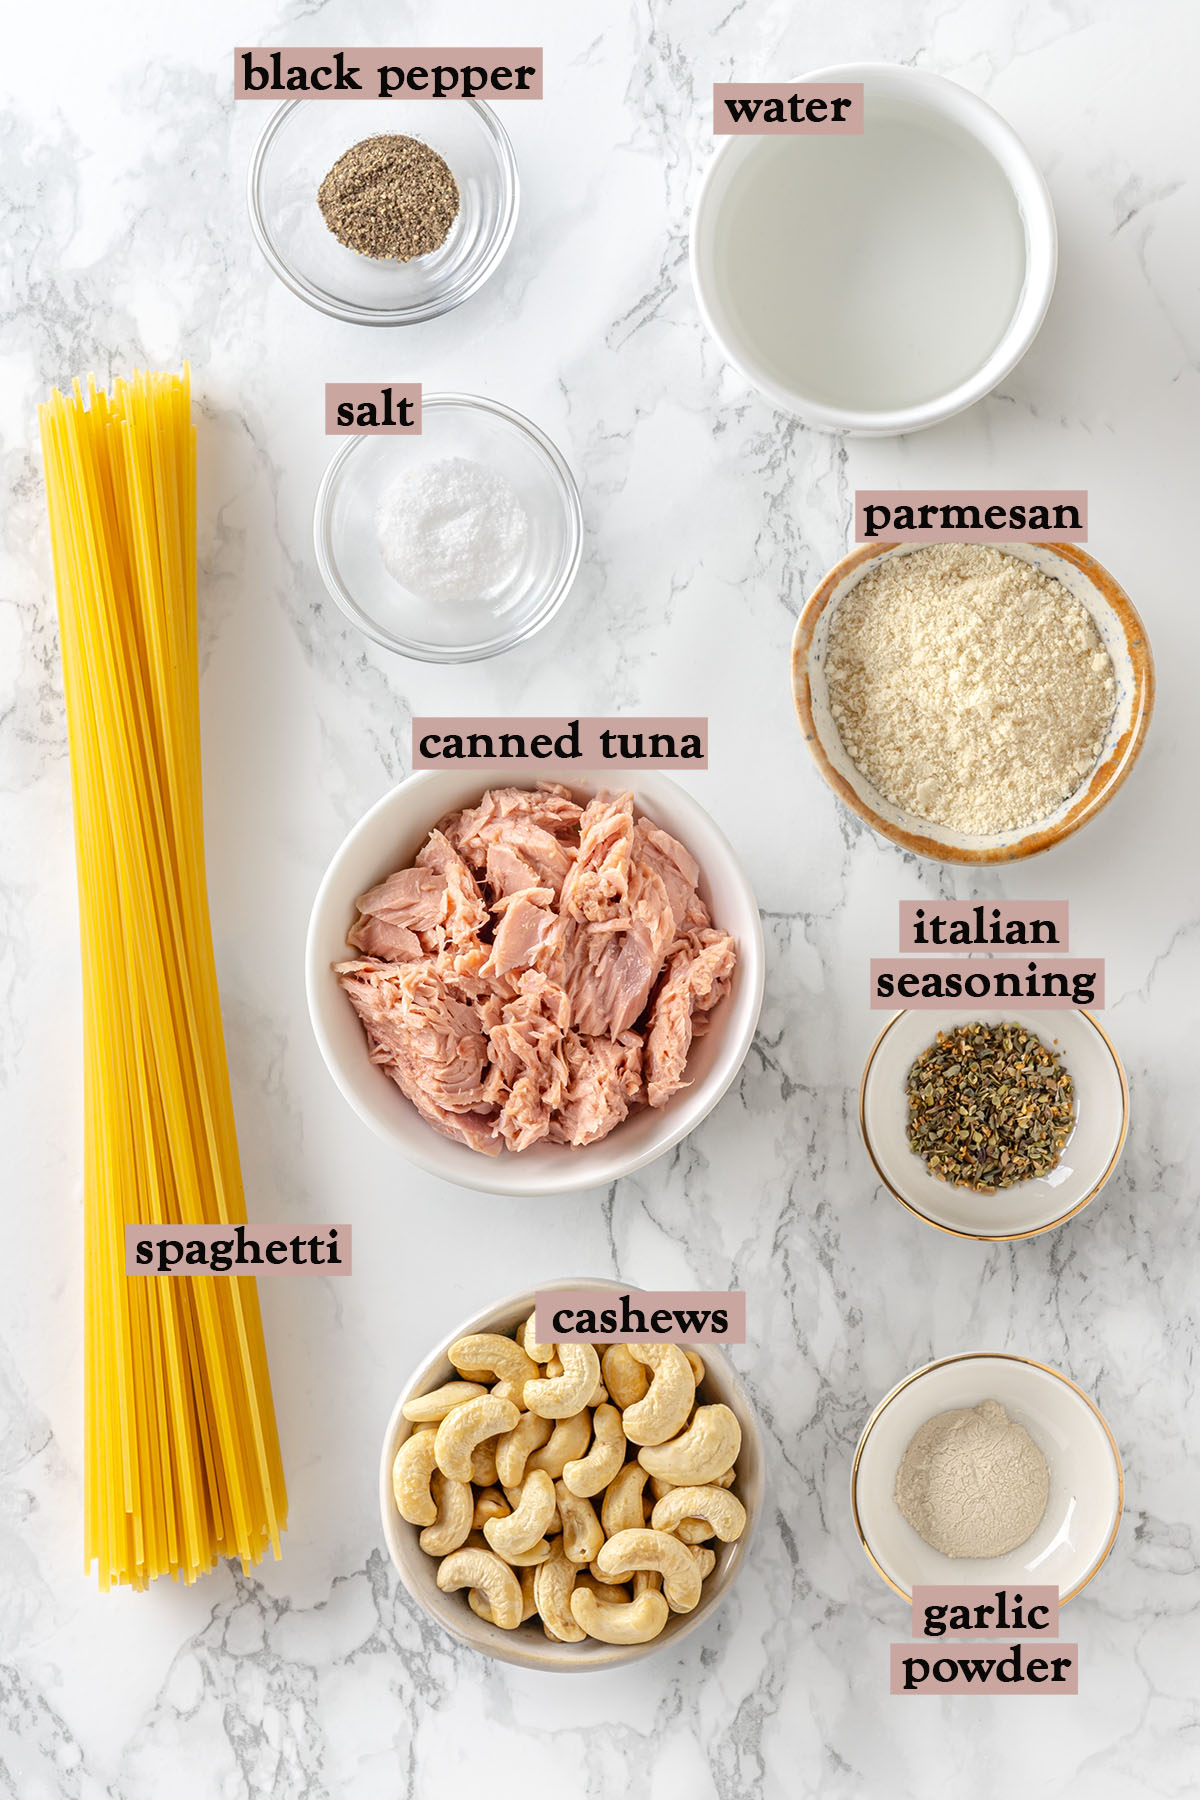 Ingredients to make canned tuna pasta with cashew sauce